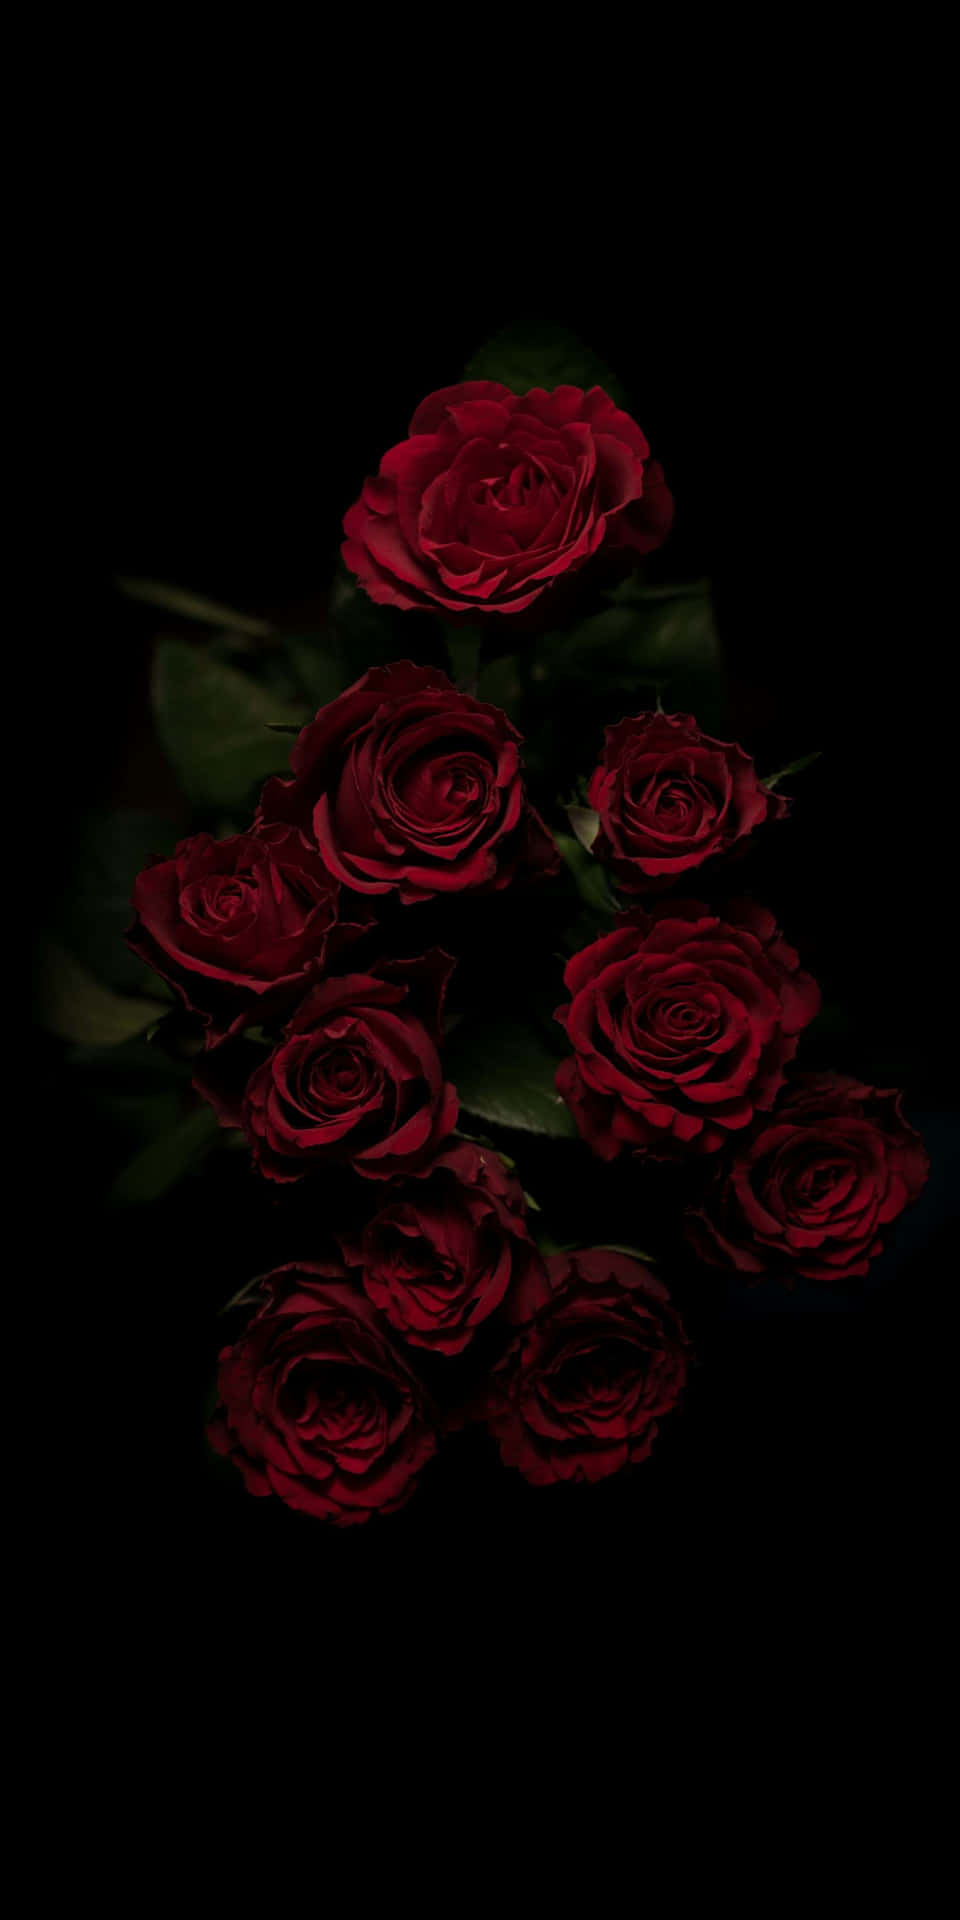 Gothic Roses Wallpaper 63 images